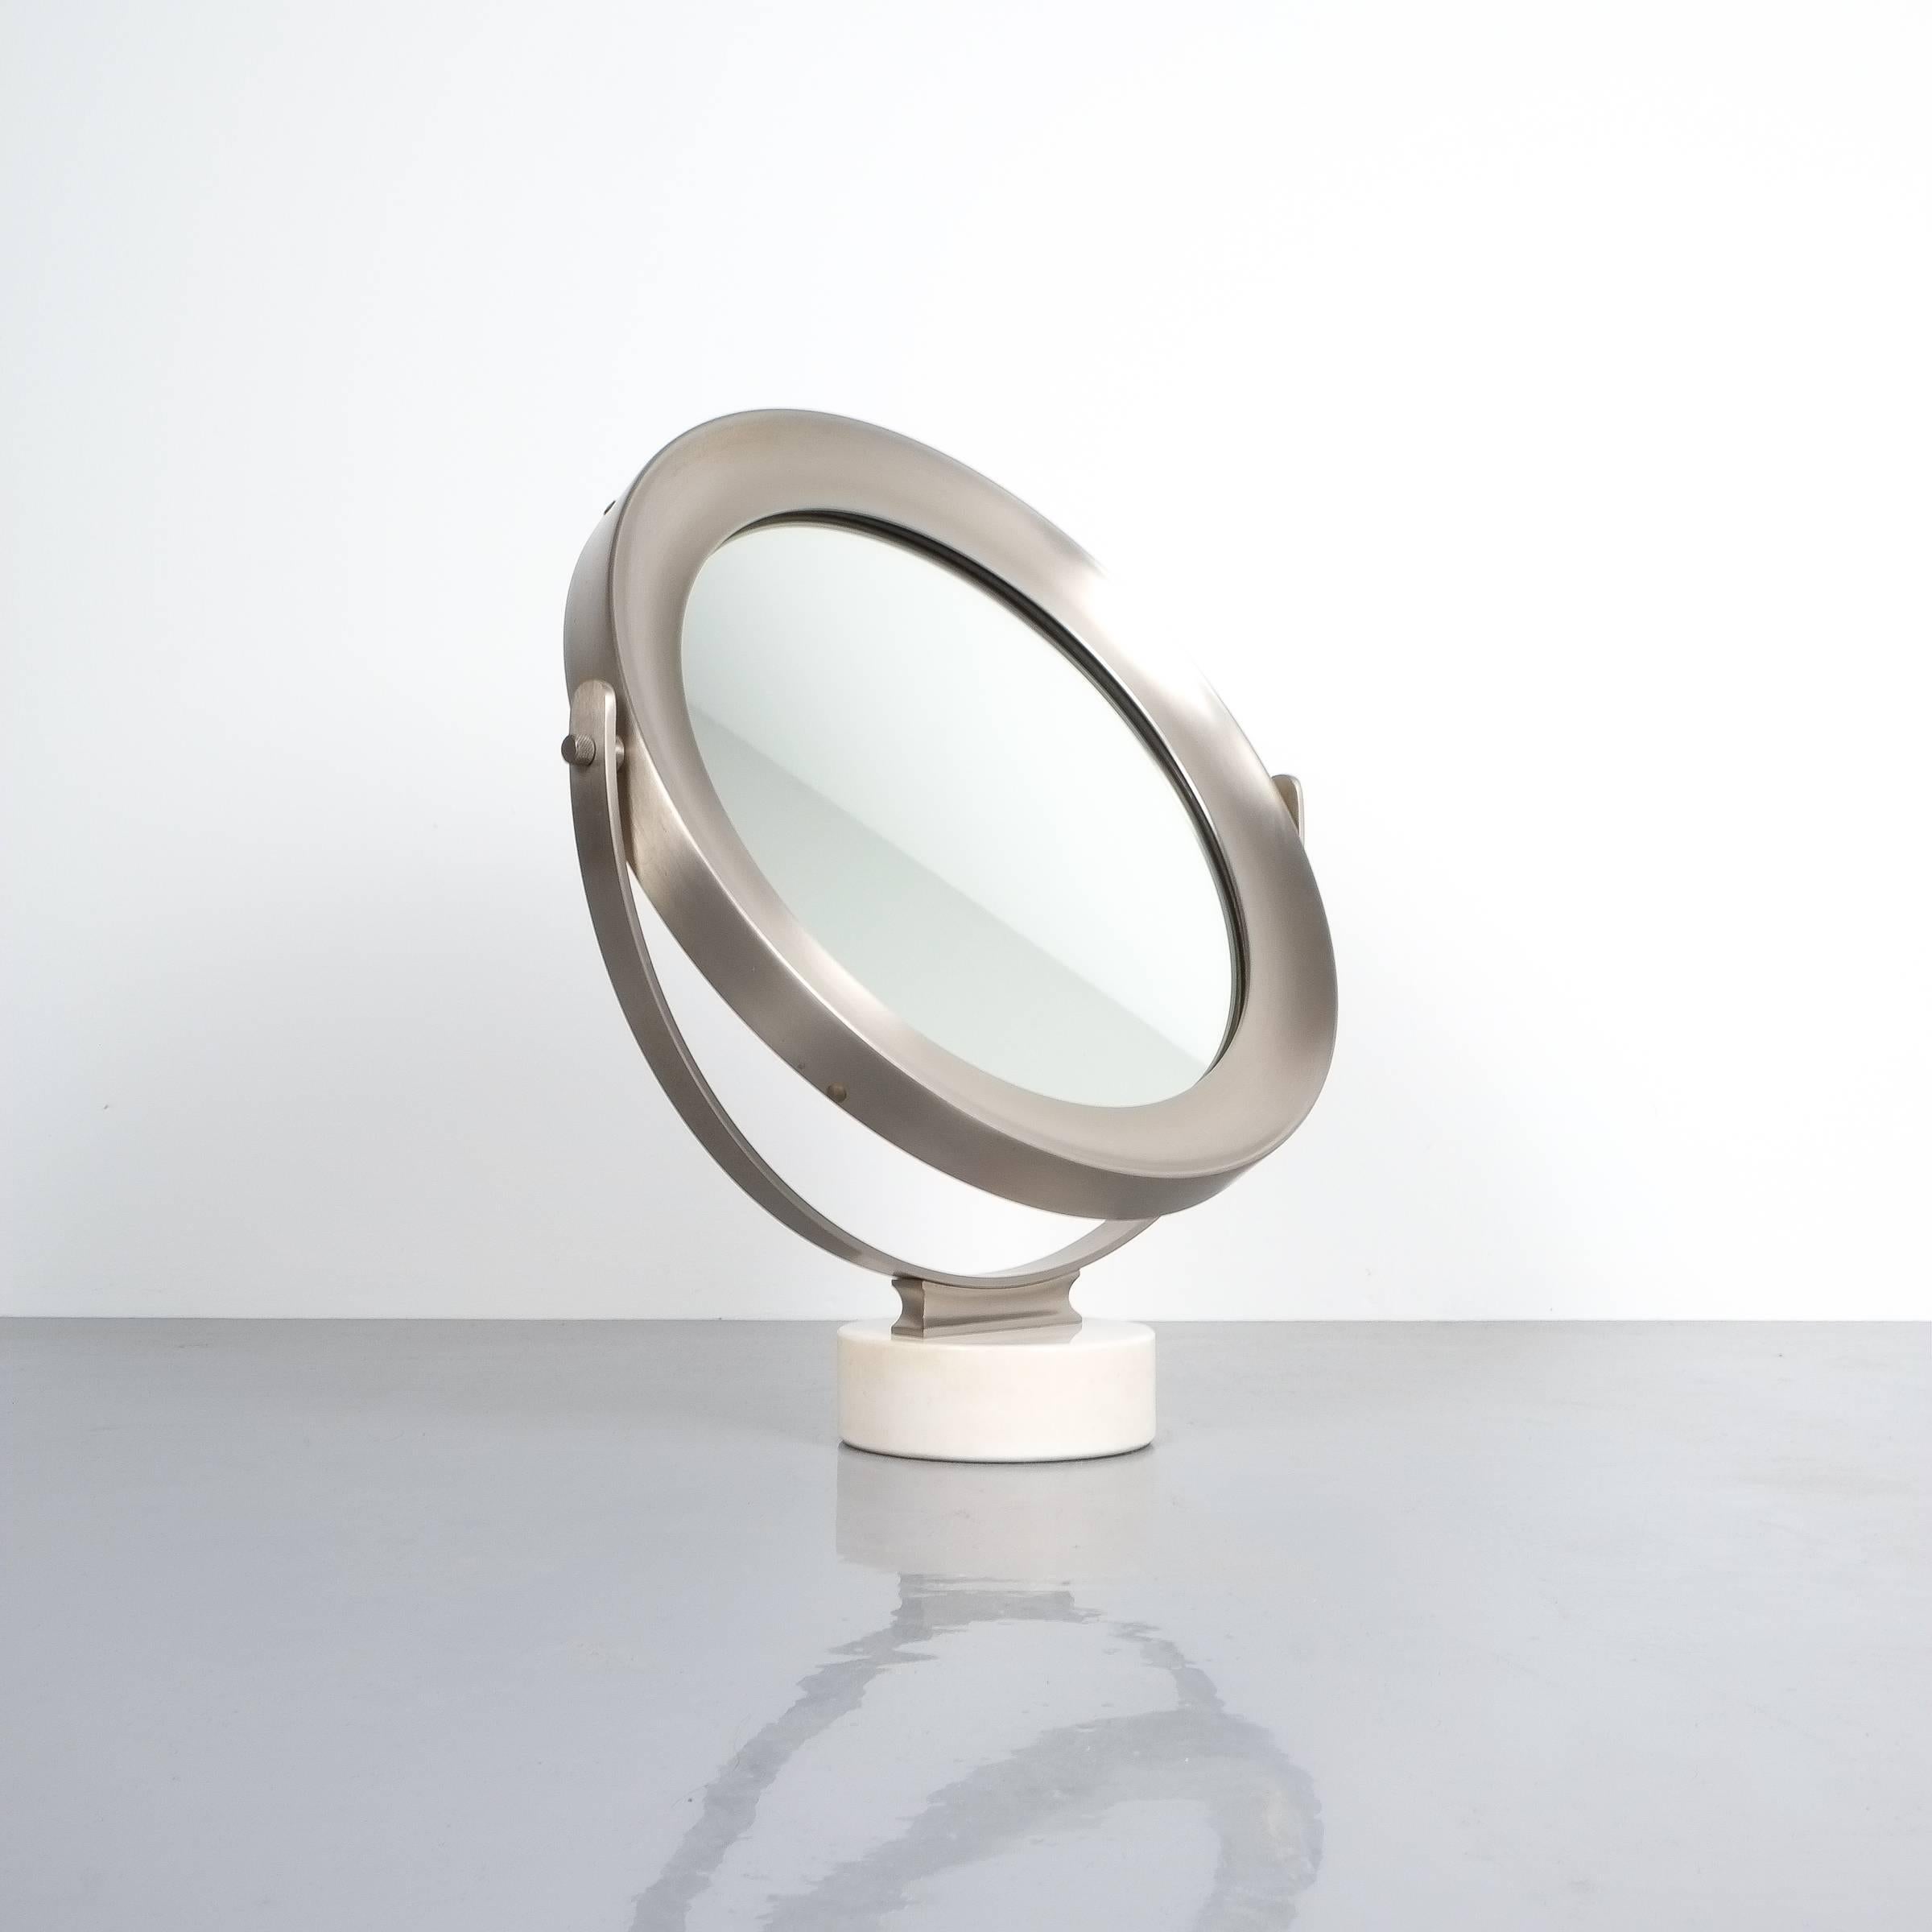 Sergio Mazza swivel marble table mirror, Italy, 1960, modern swivel table mirror with white marble base and brushed nickelled brass metal frame, excellent condition. Mirror only measures 13